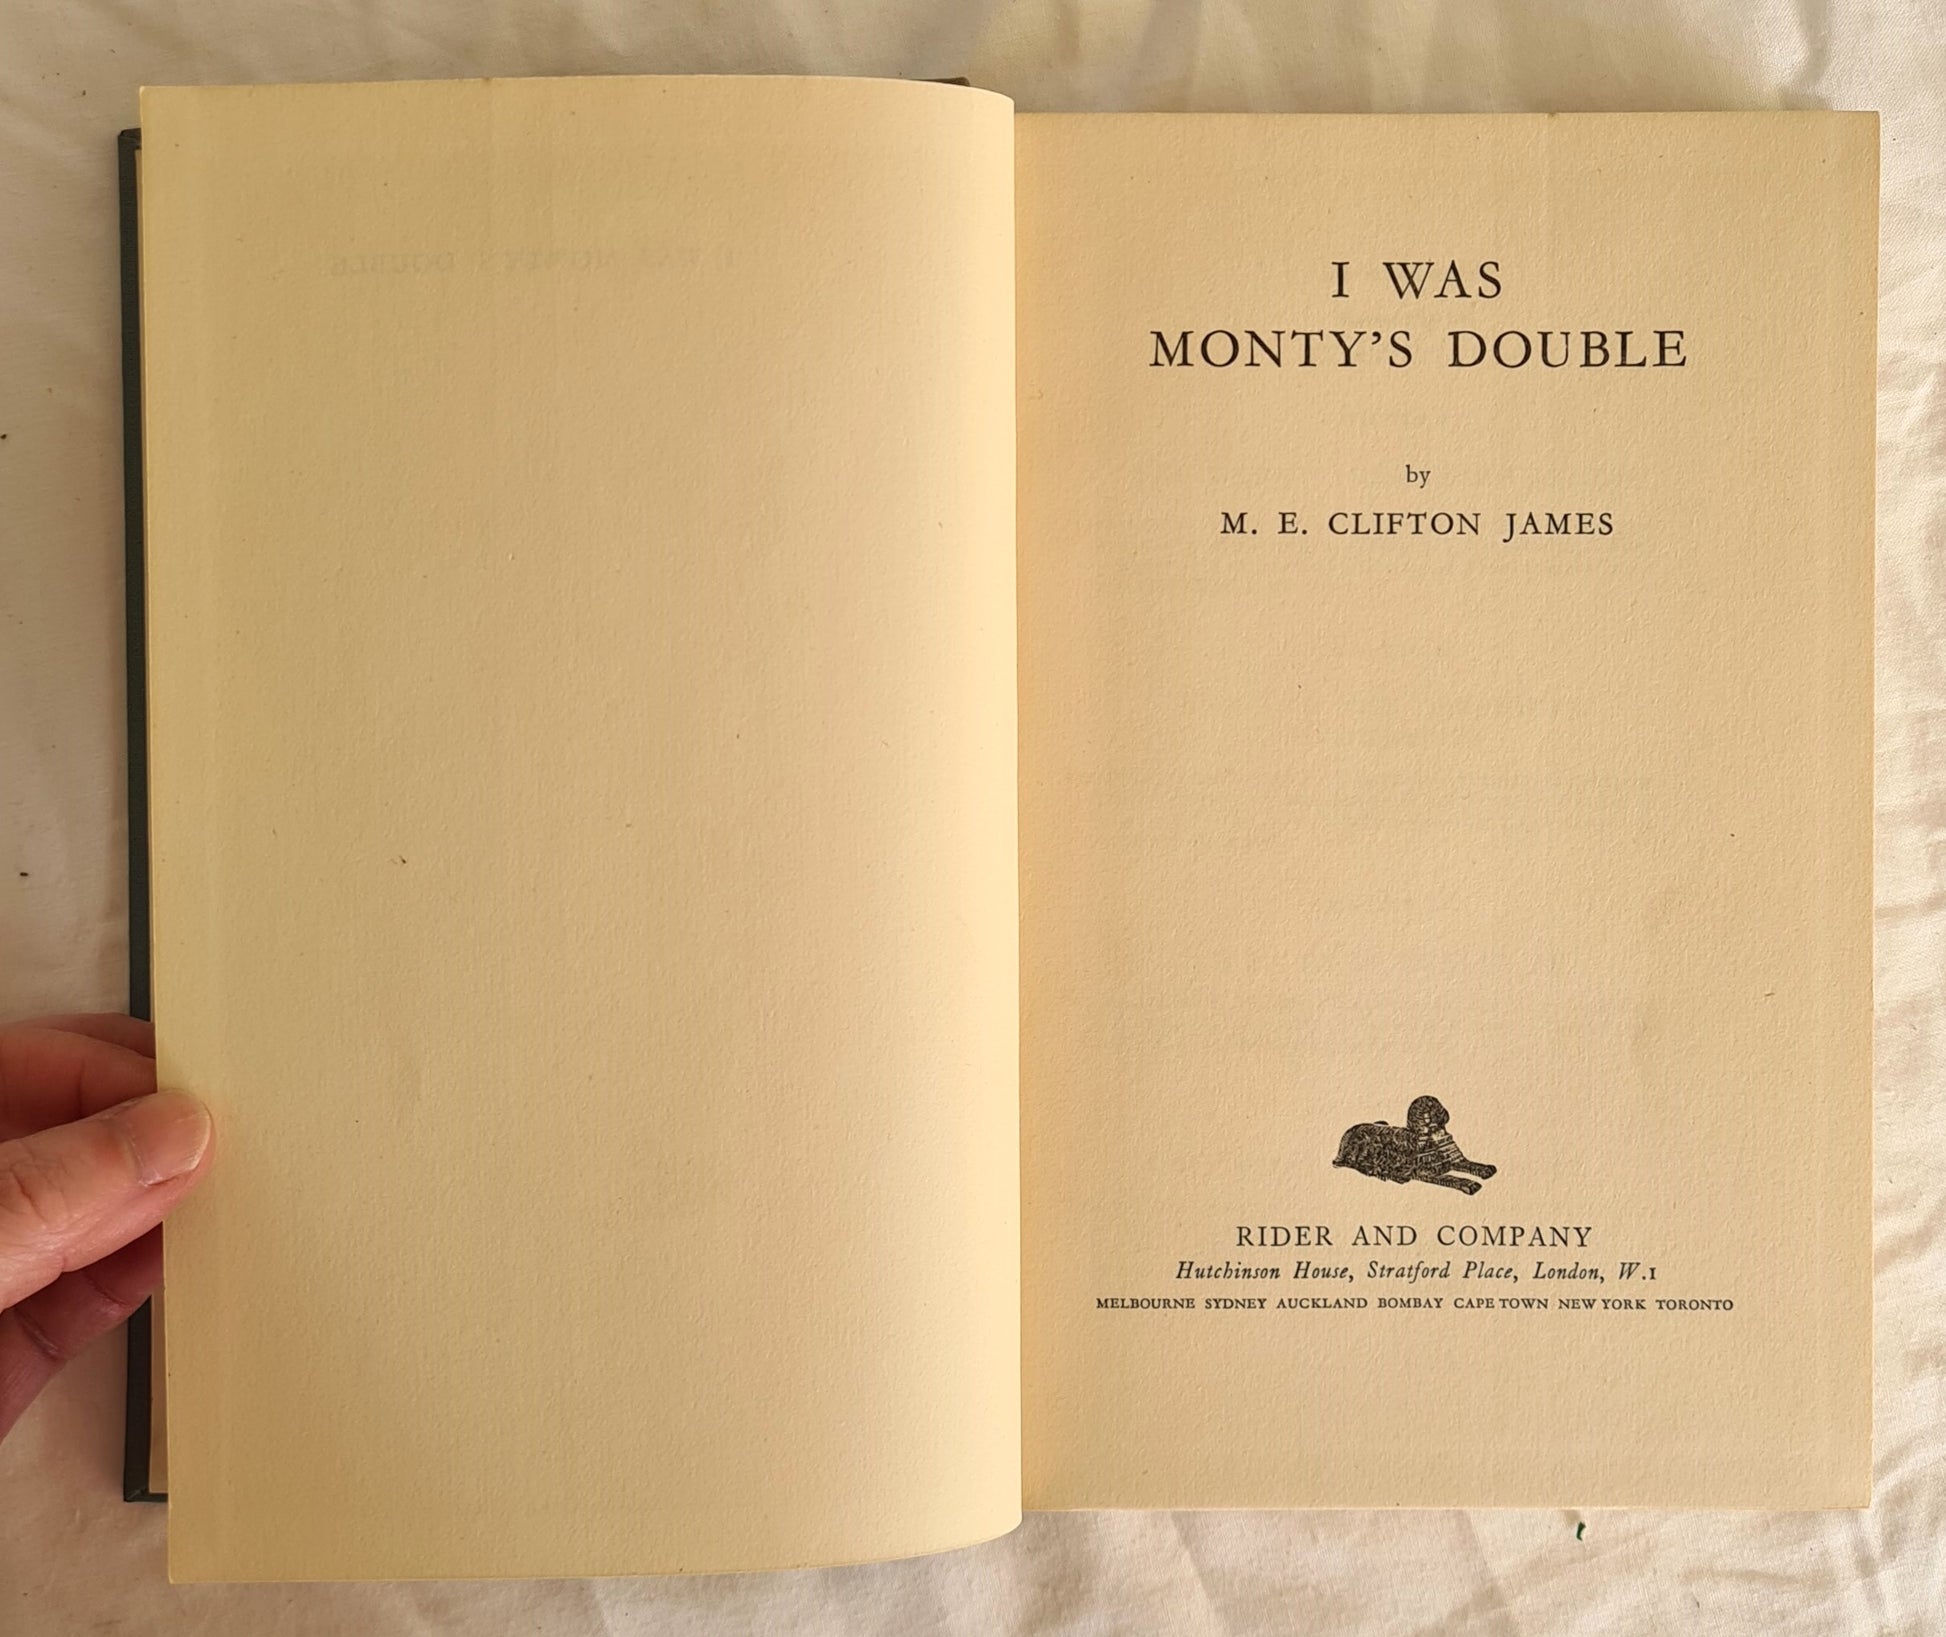 I Was Monty’s Double by M. E. Clifton James